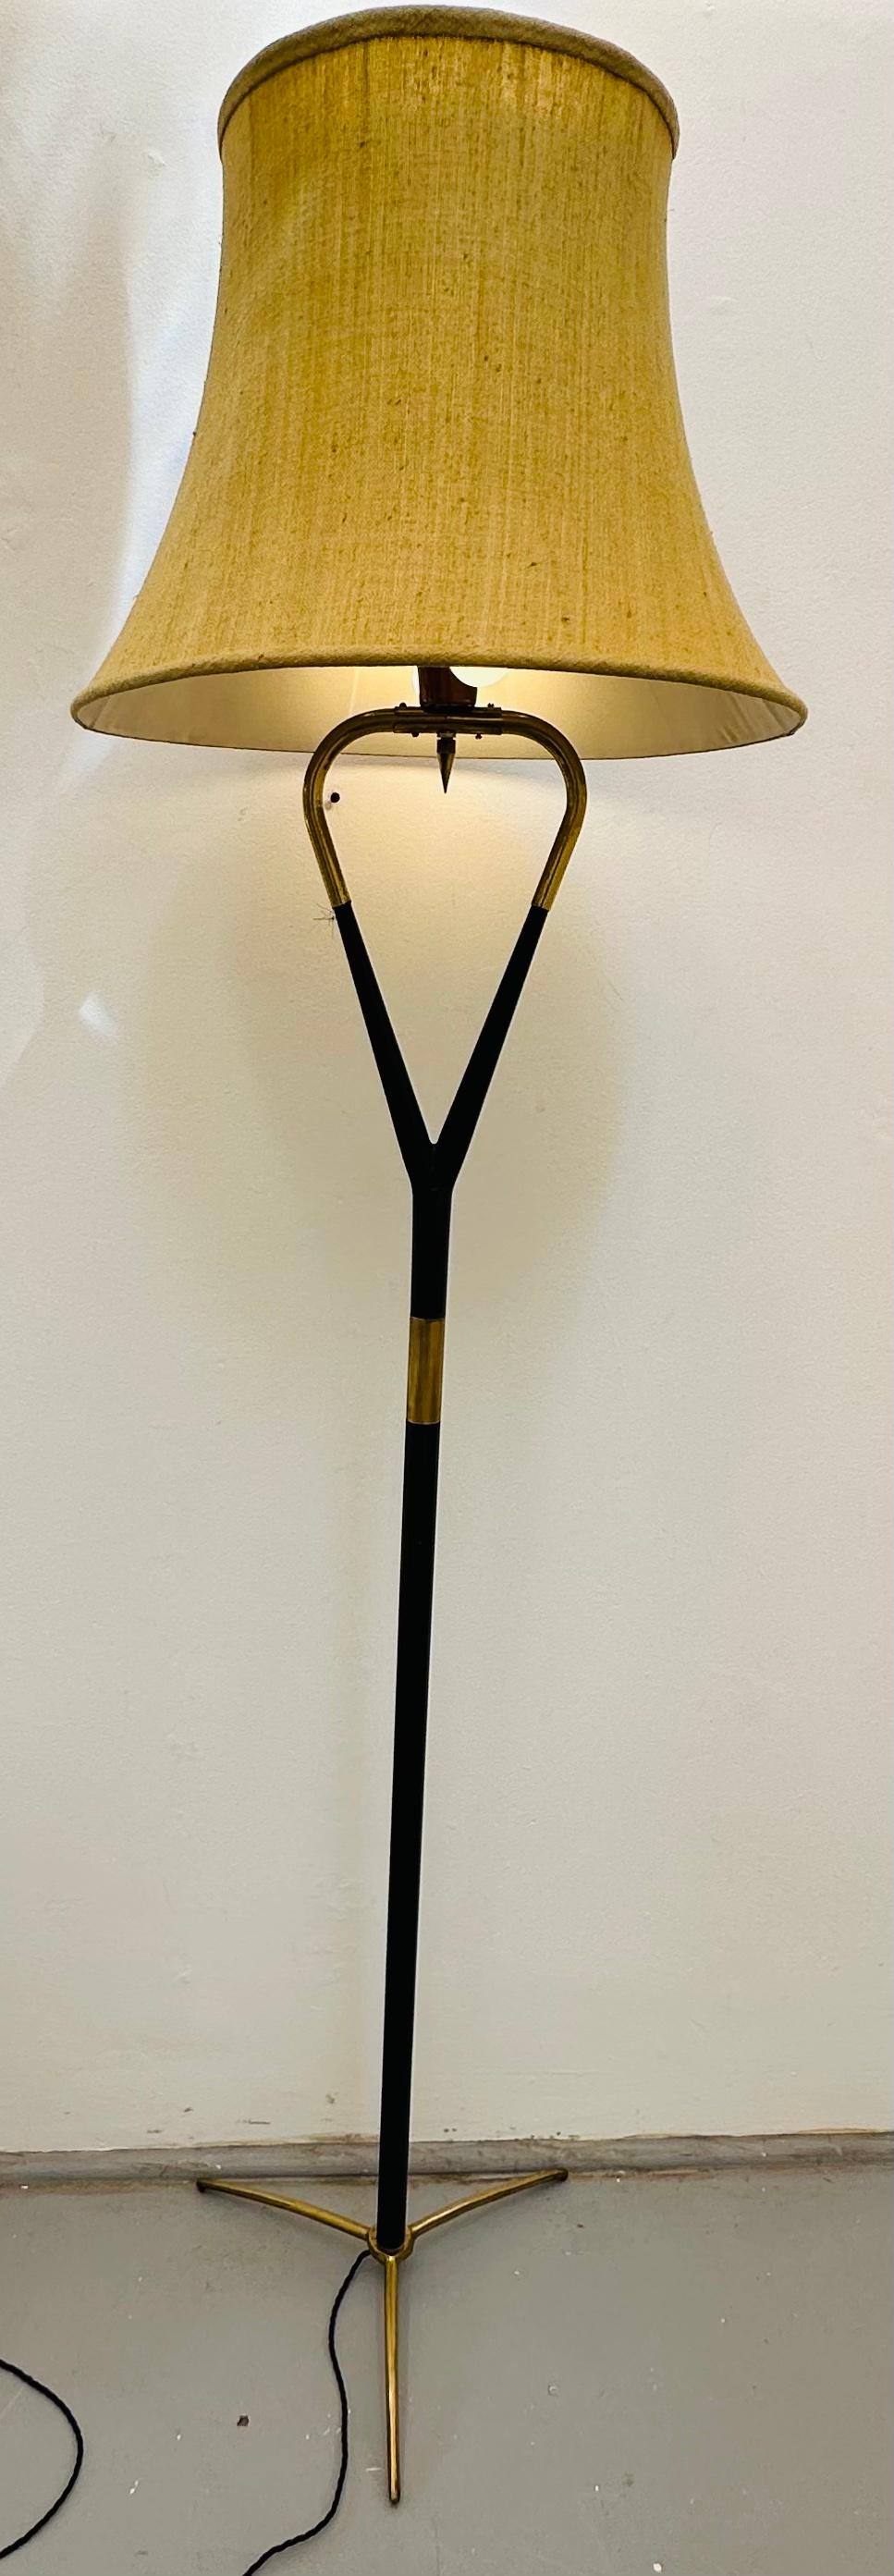 A stunning 1950s mid century brass and black lacquered gloss wood tripod floor lamp.  The floor lamp stands on a brass tripod base with a feature detail ribbed brass band situated on the lacquered supporting stem towards the heart-shaped